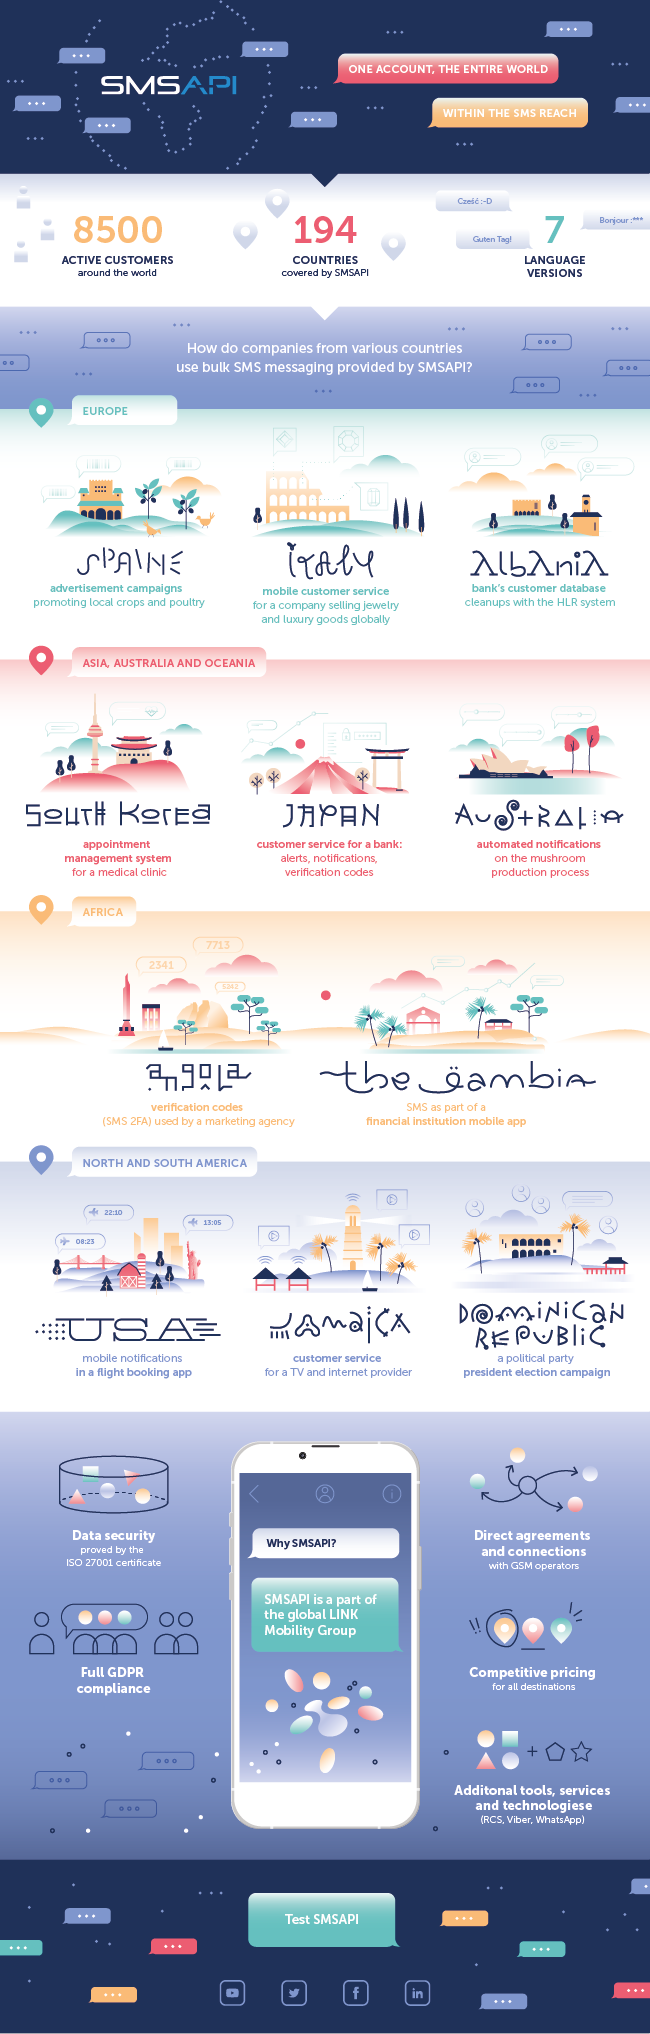 SMSAPI as a global SMS - infographic